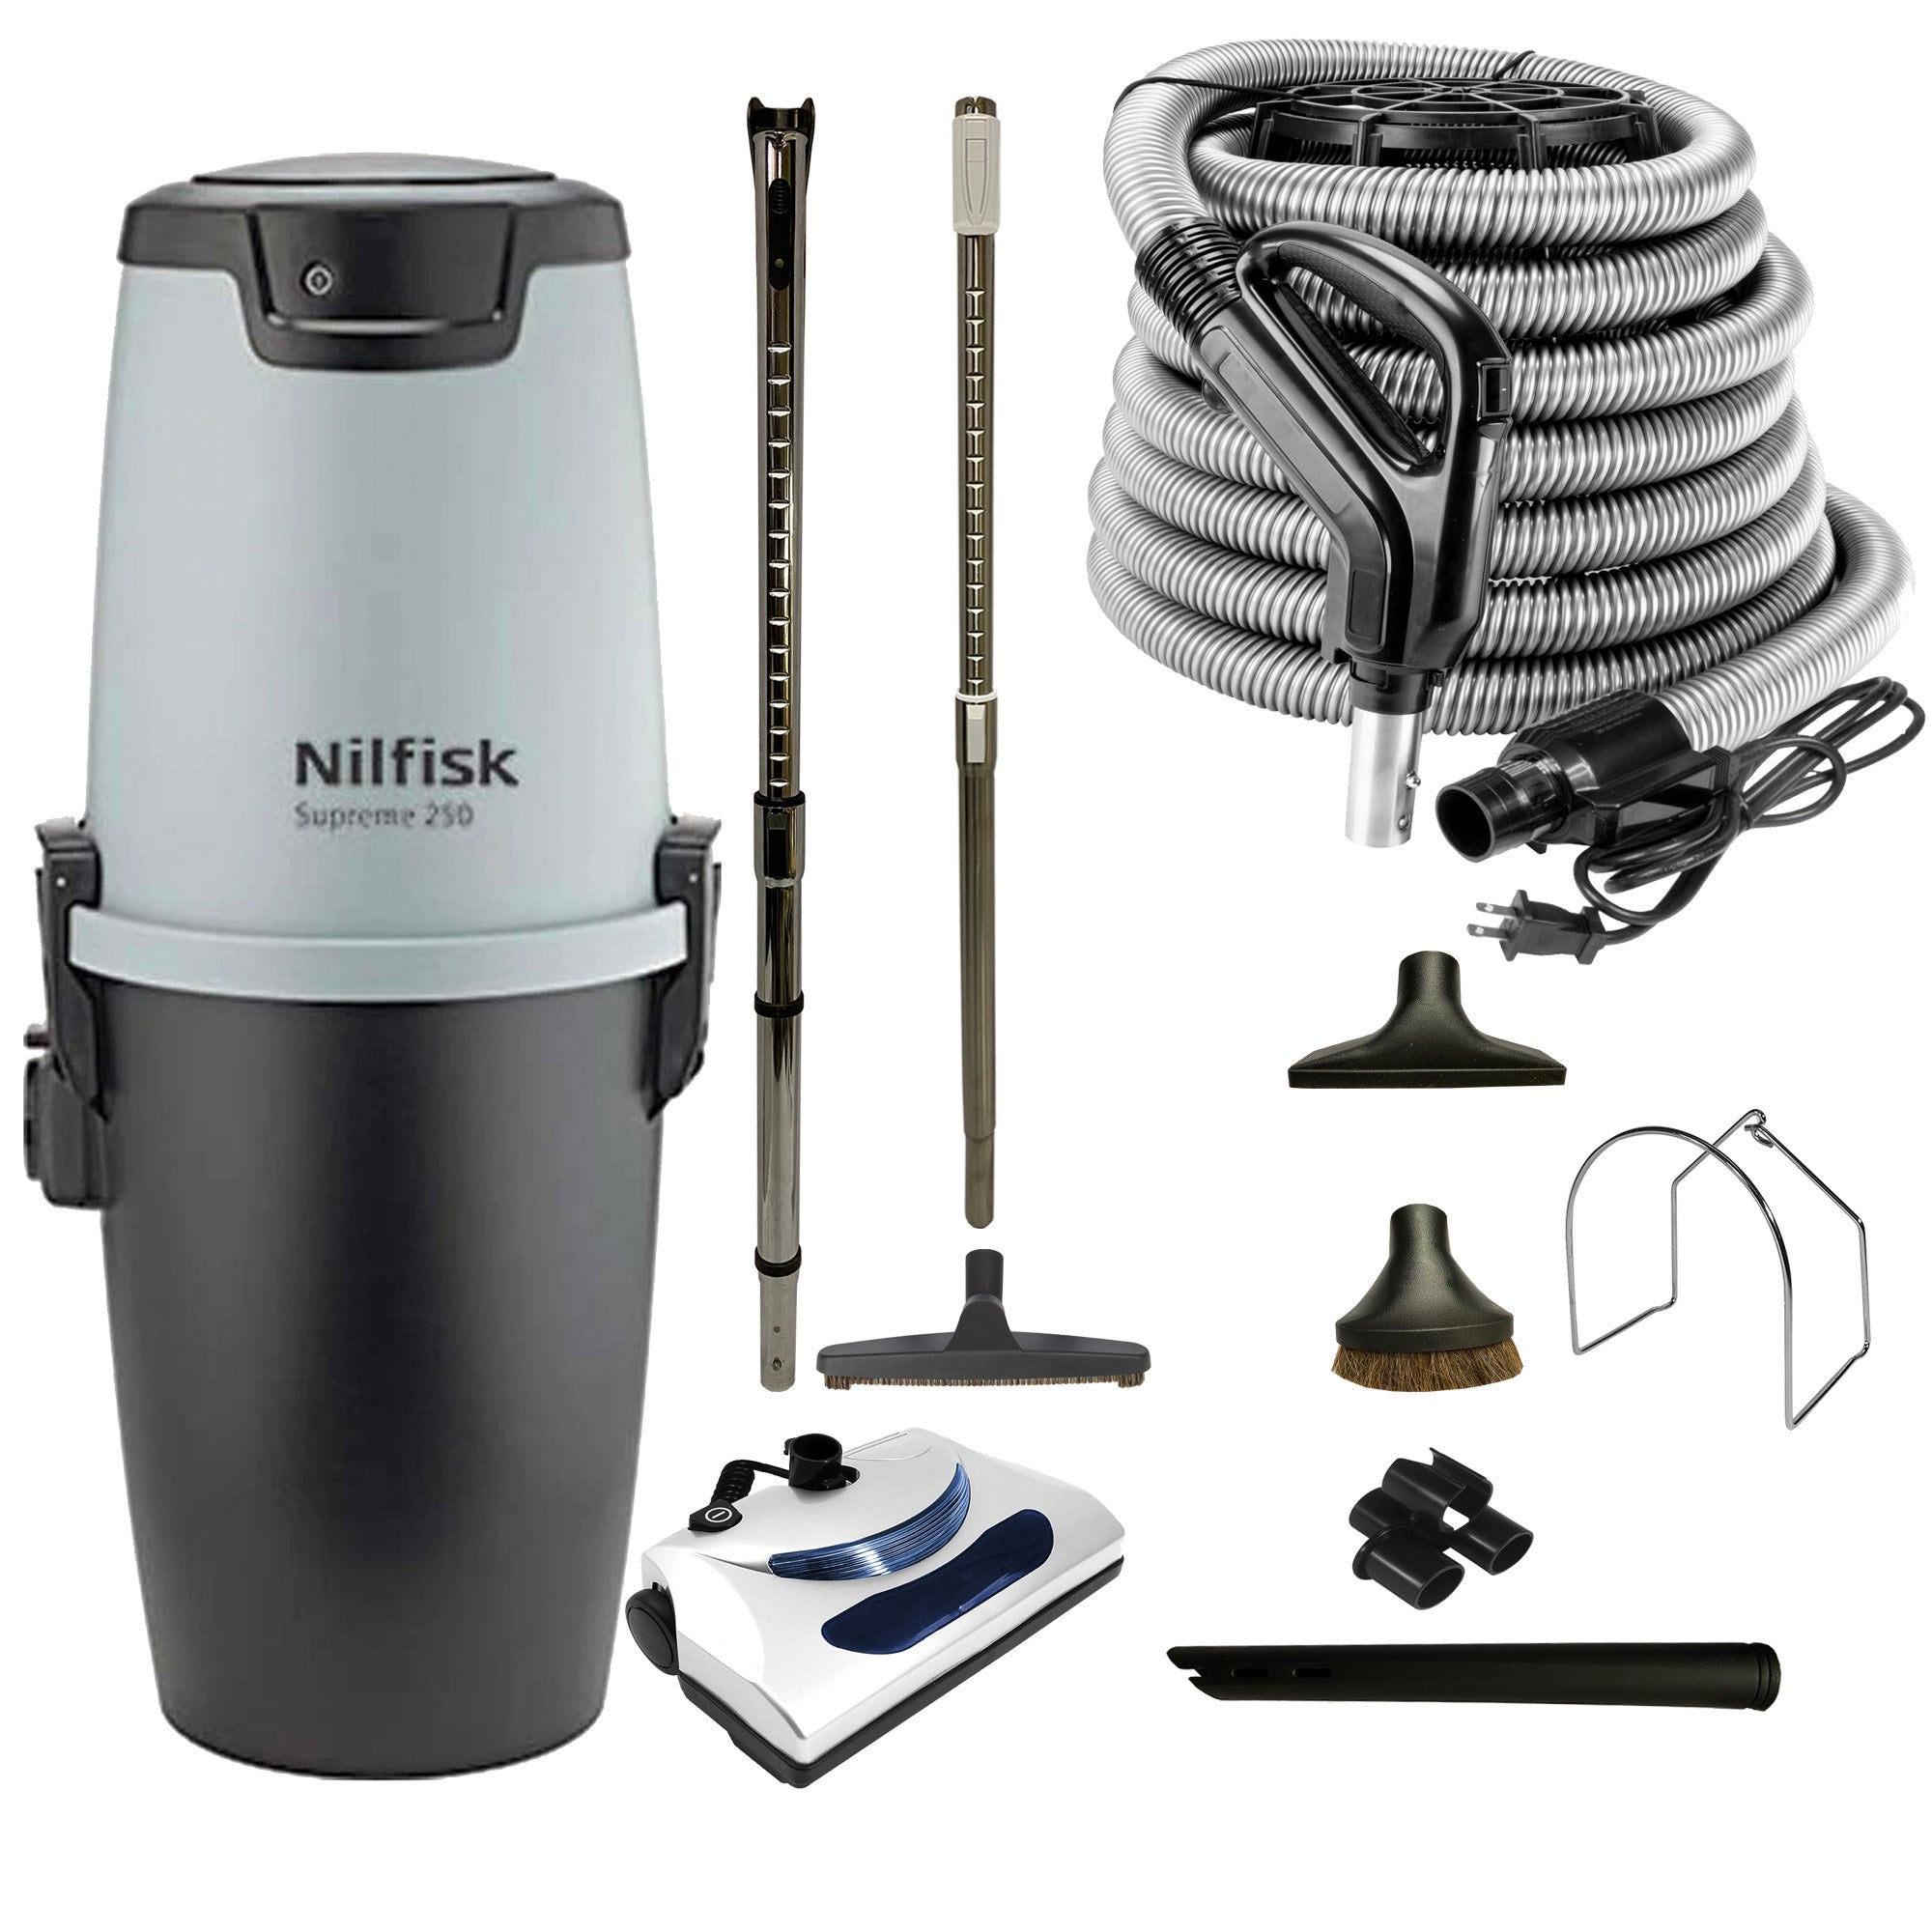 Nilfisk Supreme 250 Central Vacuum with Basic Electric Package - Black